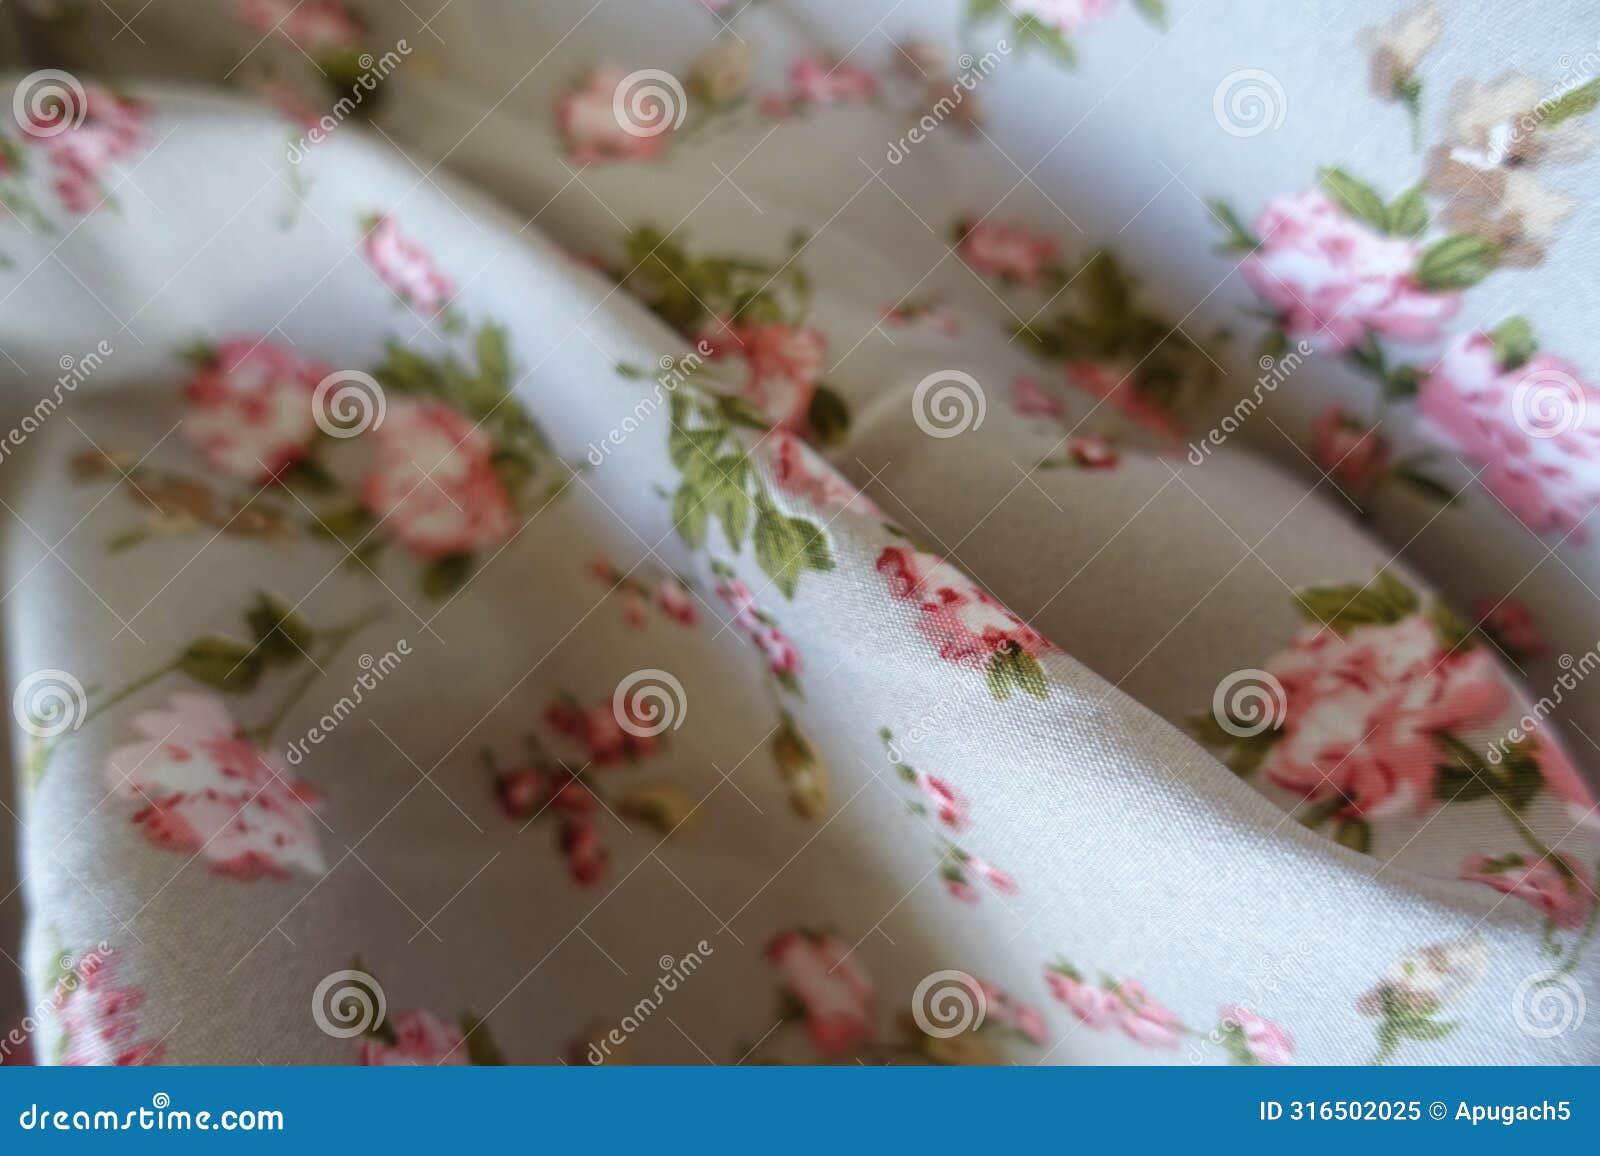 soft fold on grey rayon with old-fashioned floral print